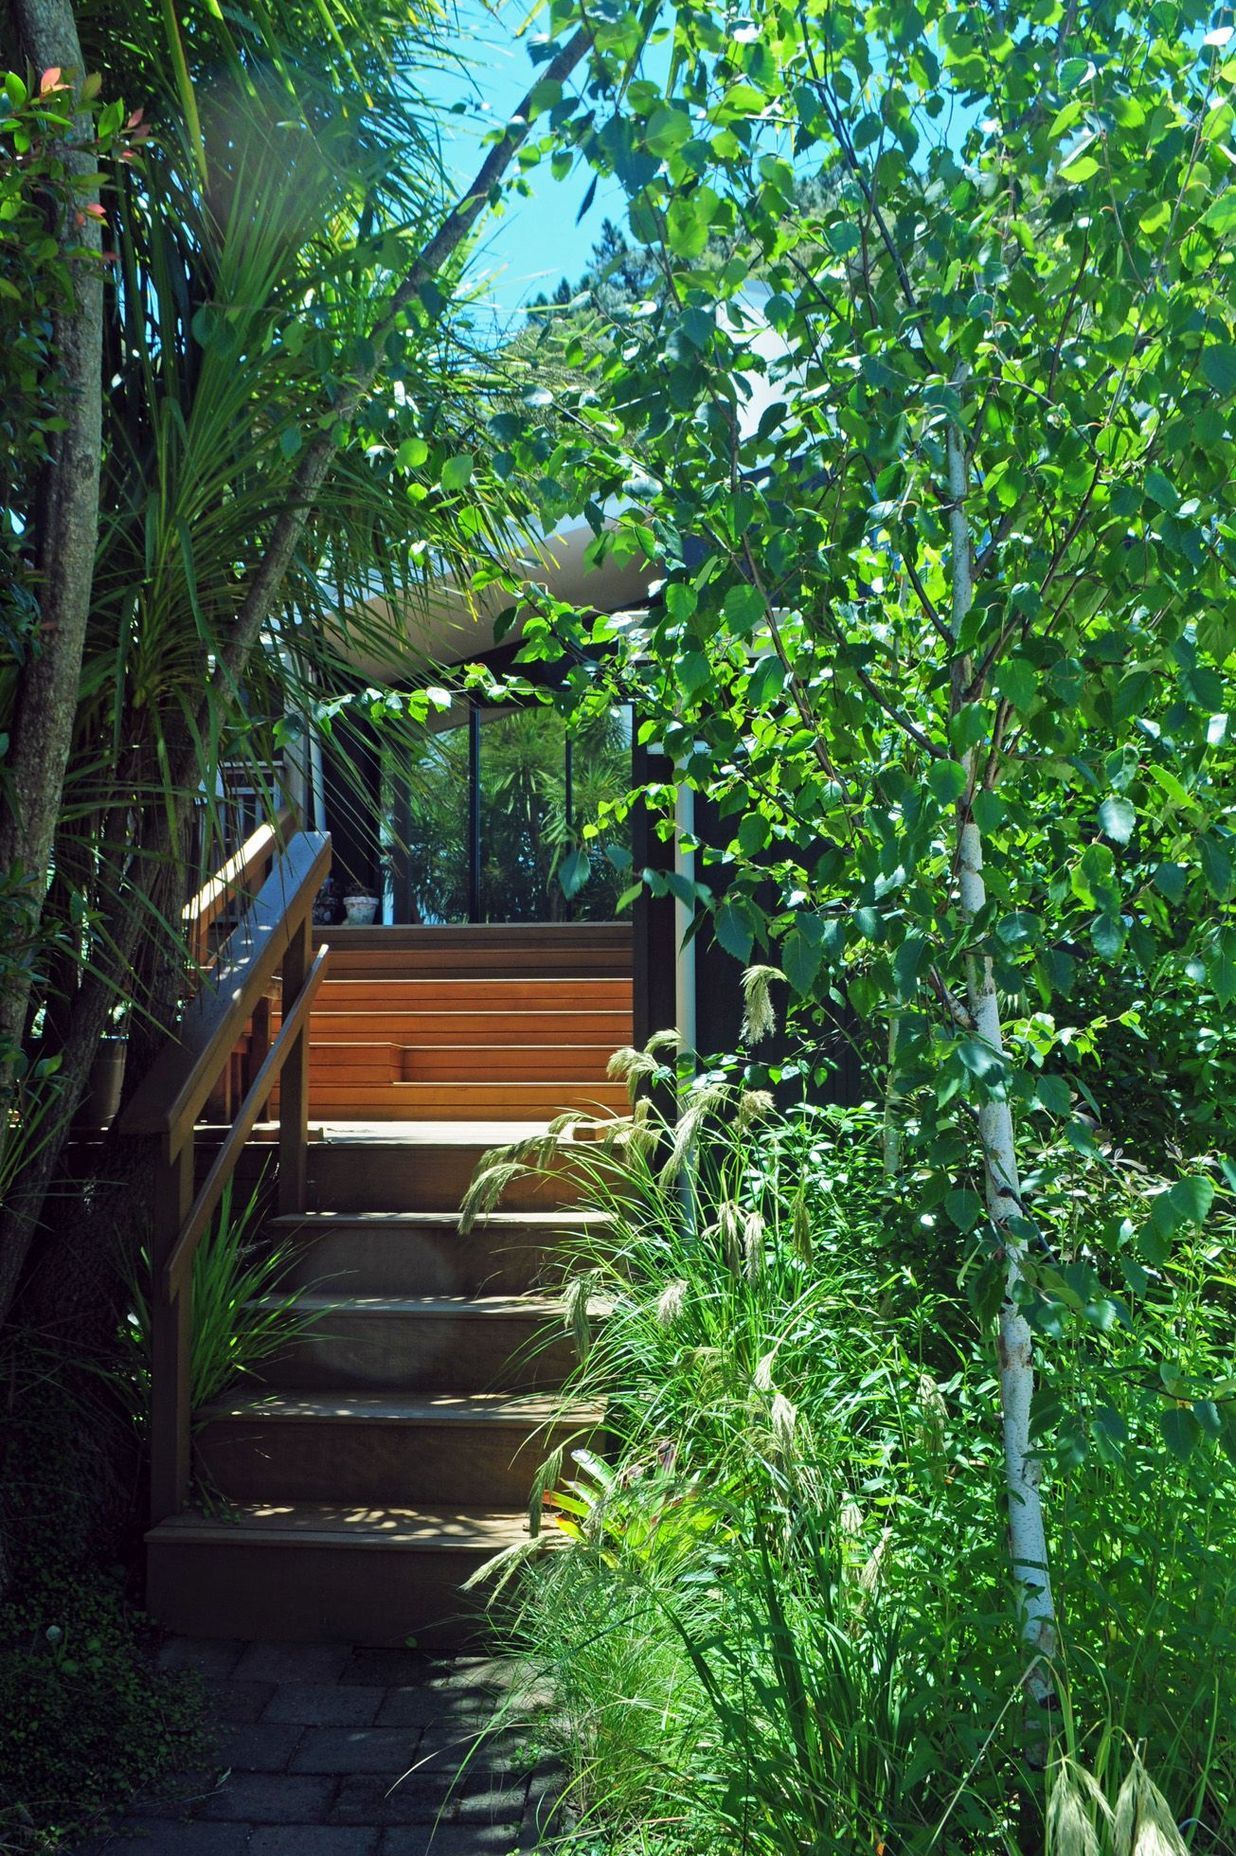 Approach to the house through a glade-like space